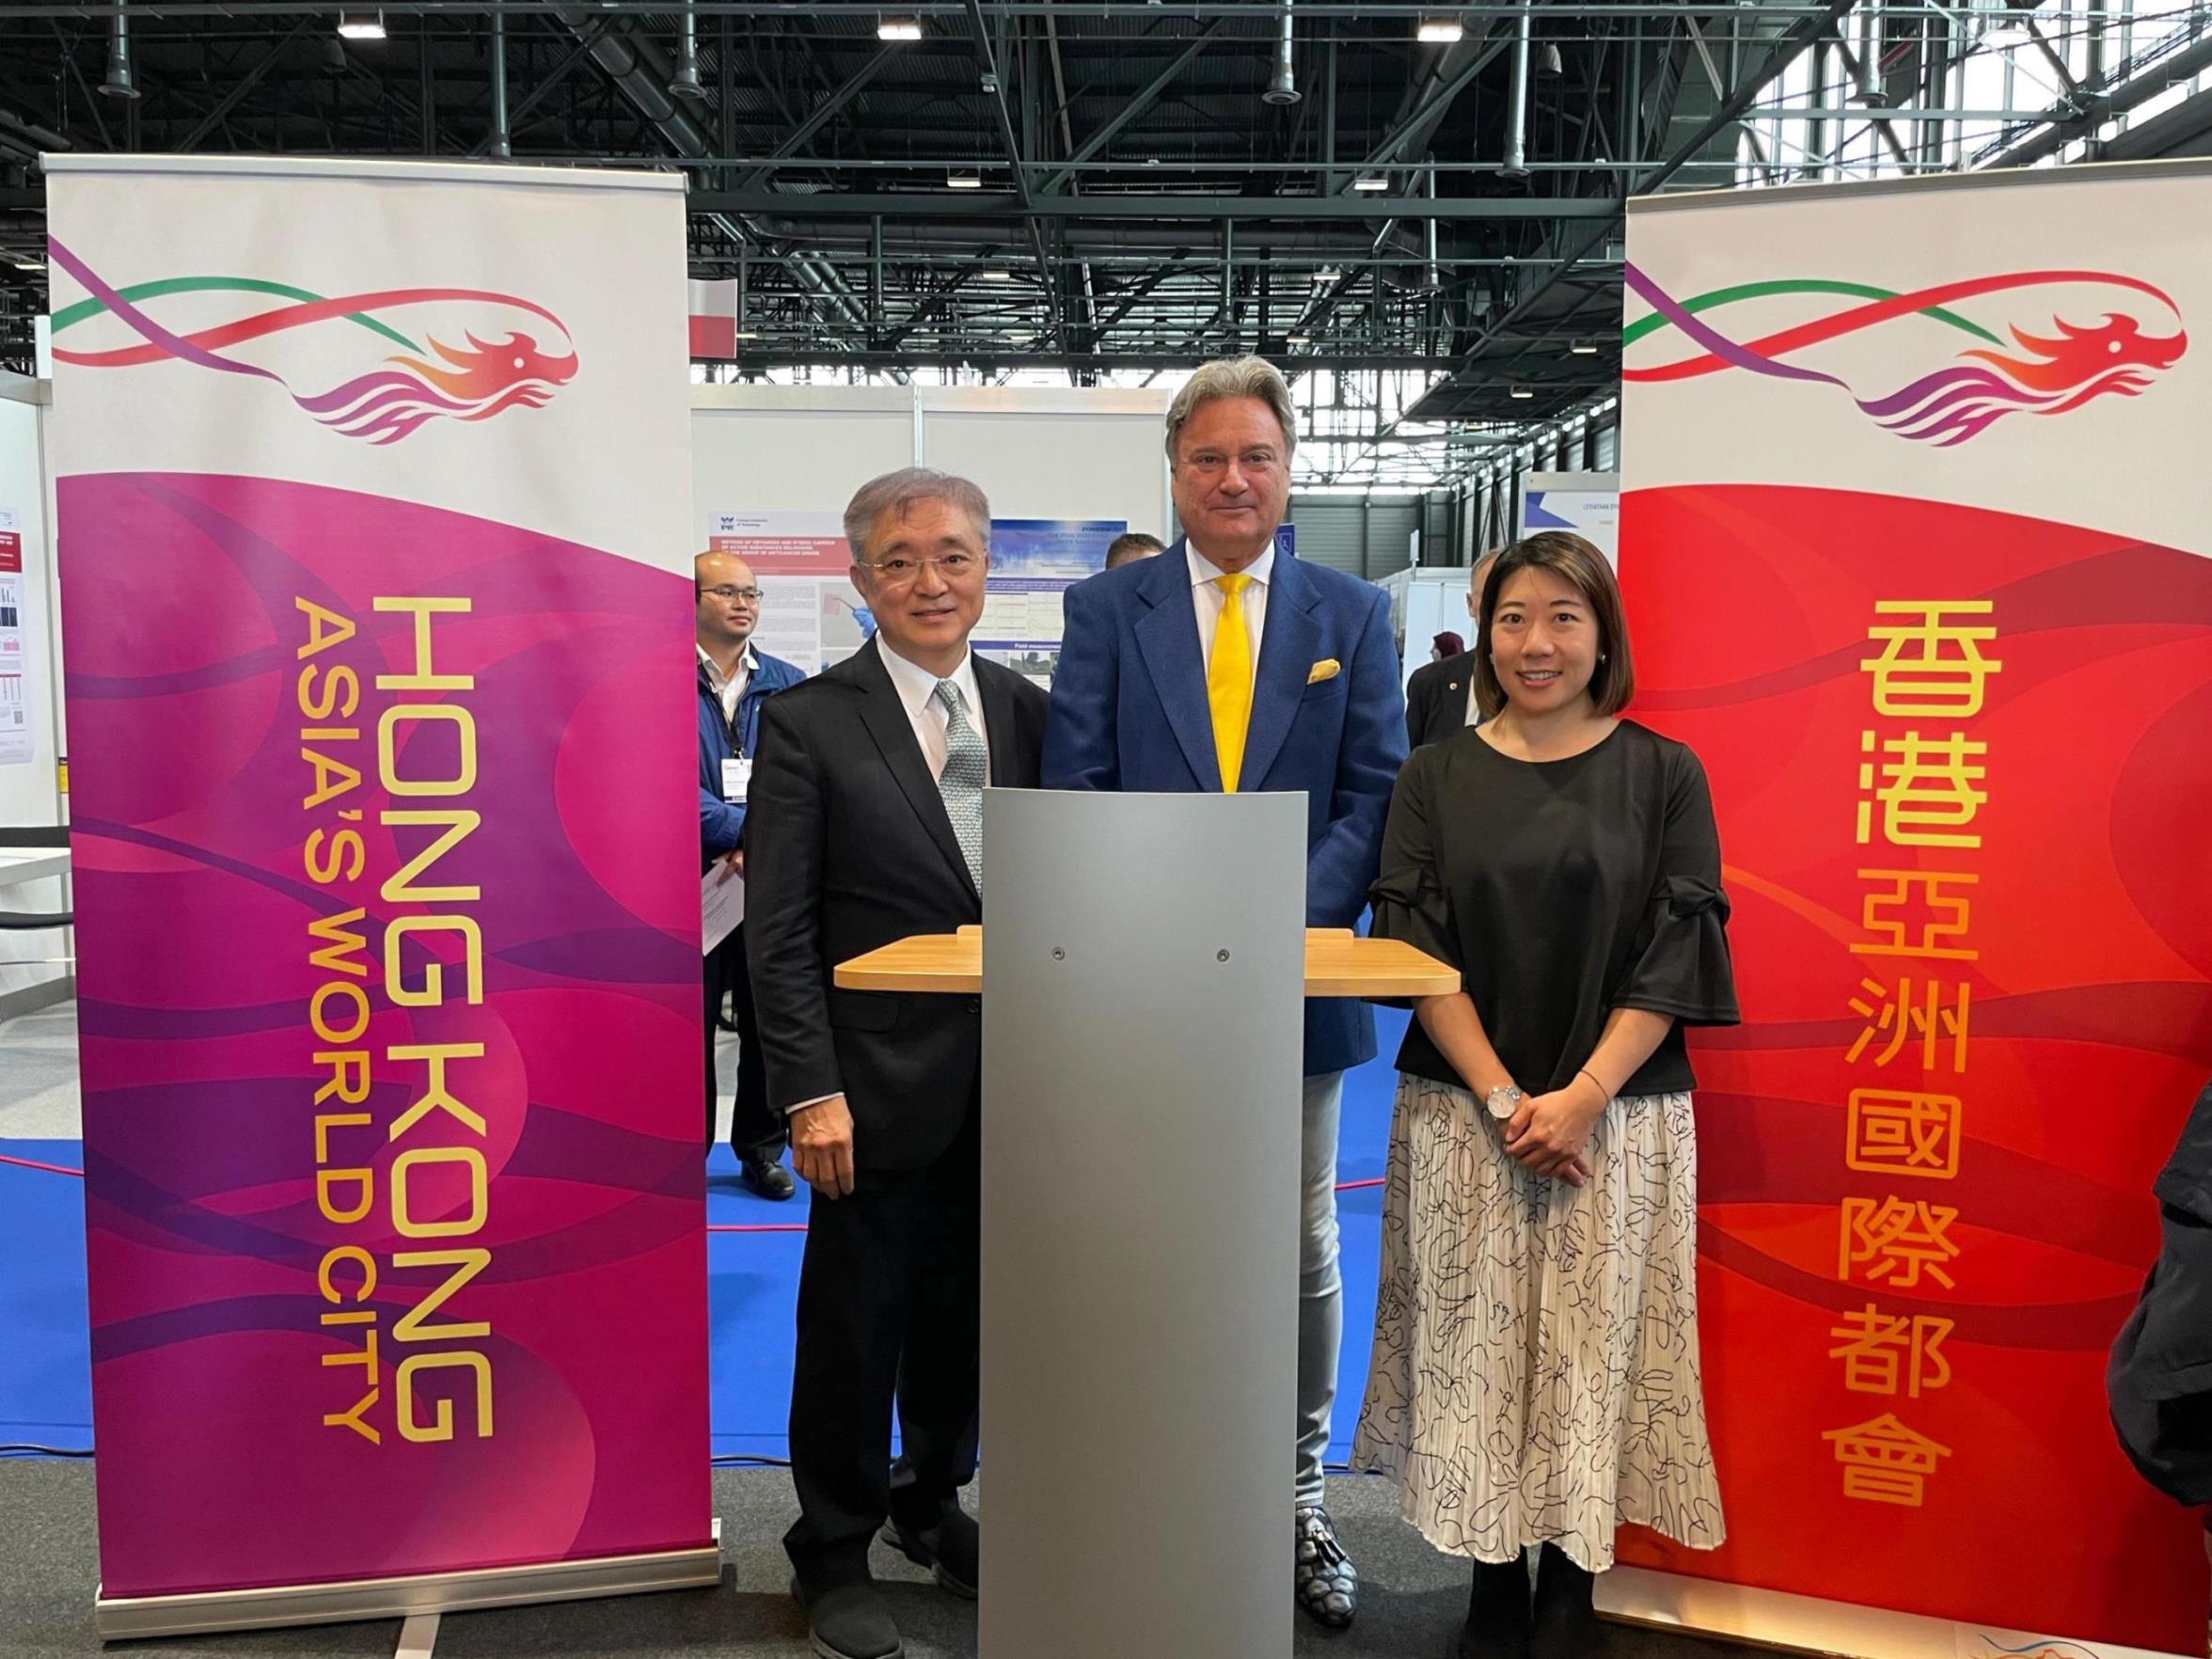 The representative of the Hong Kong delegation, Professor Andrew Young (left); the President of the Jury of the International Exhibition of Inventions of Geneva, Mr David Taji Farouki (centre); and the Director of the Hong Kong Economic and Trade Office, Berlin, Ms Jenny Szeto (right), are pictured at the 49th International Exhibition of Inventions of Geneva.